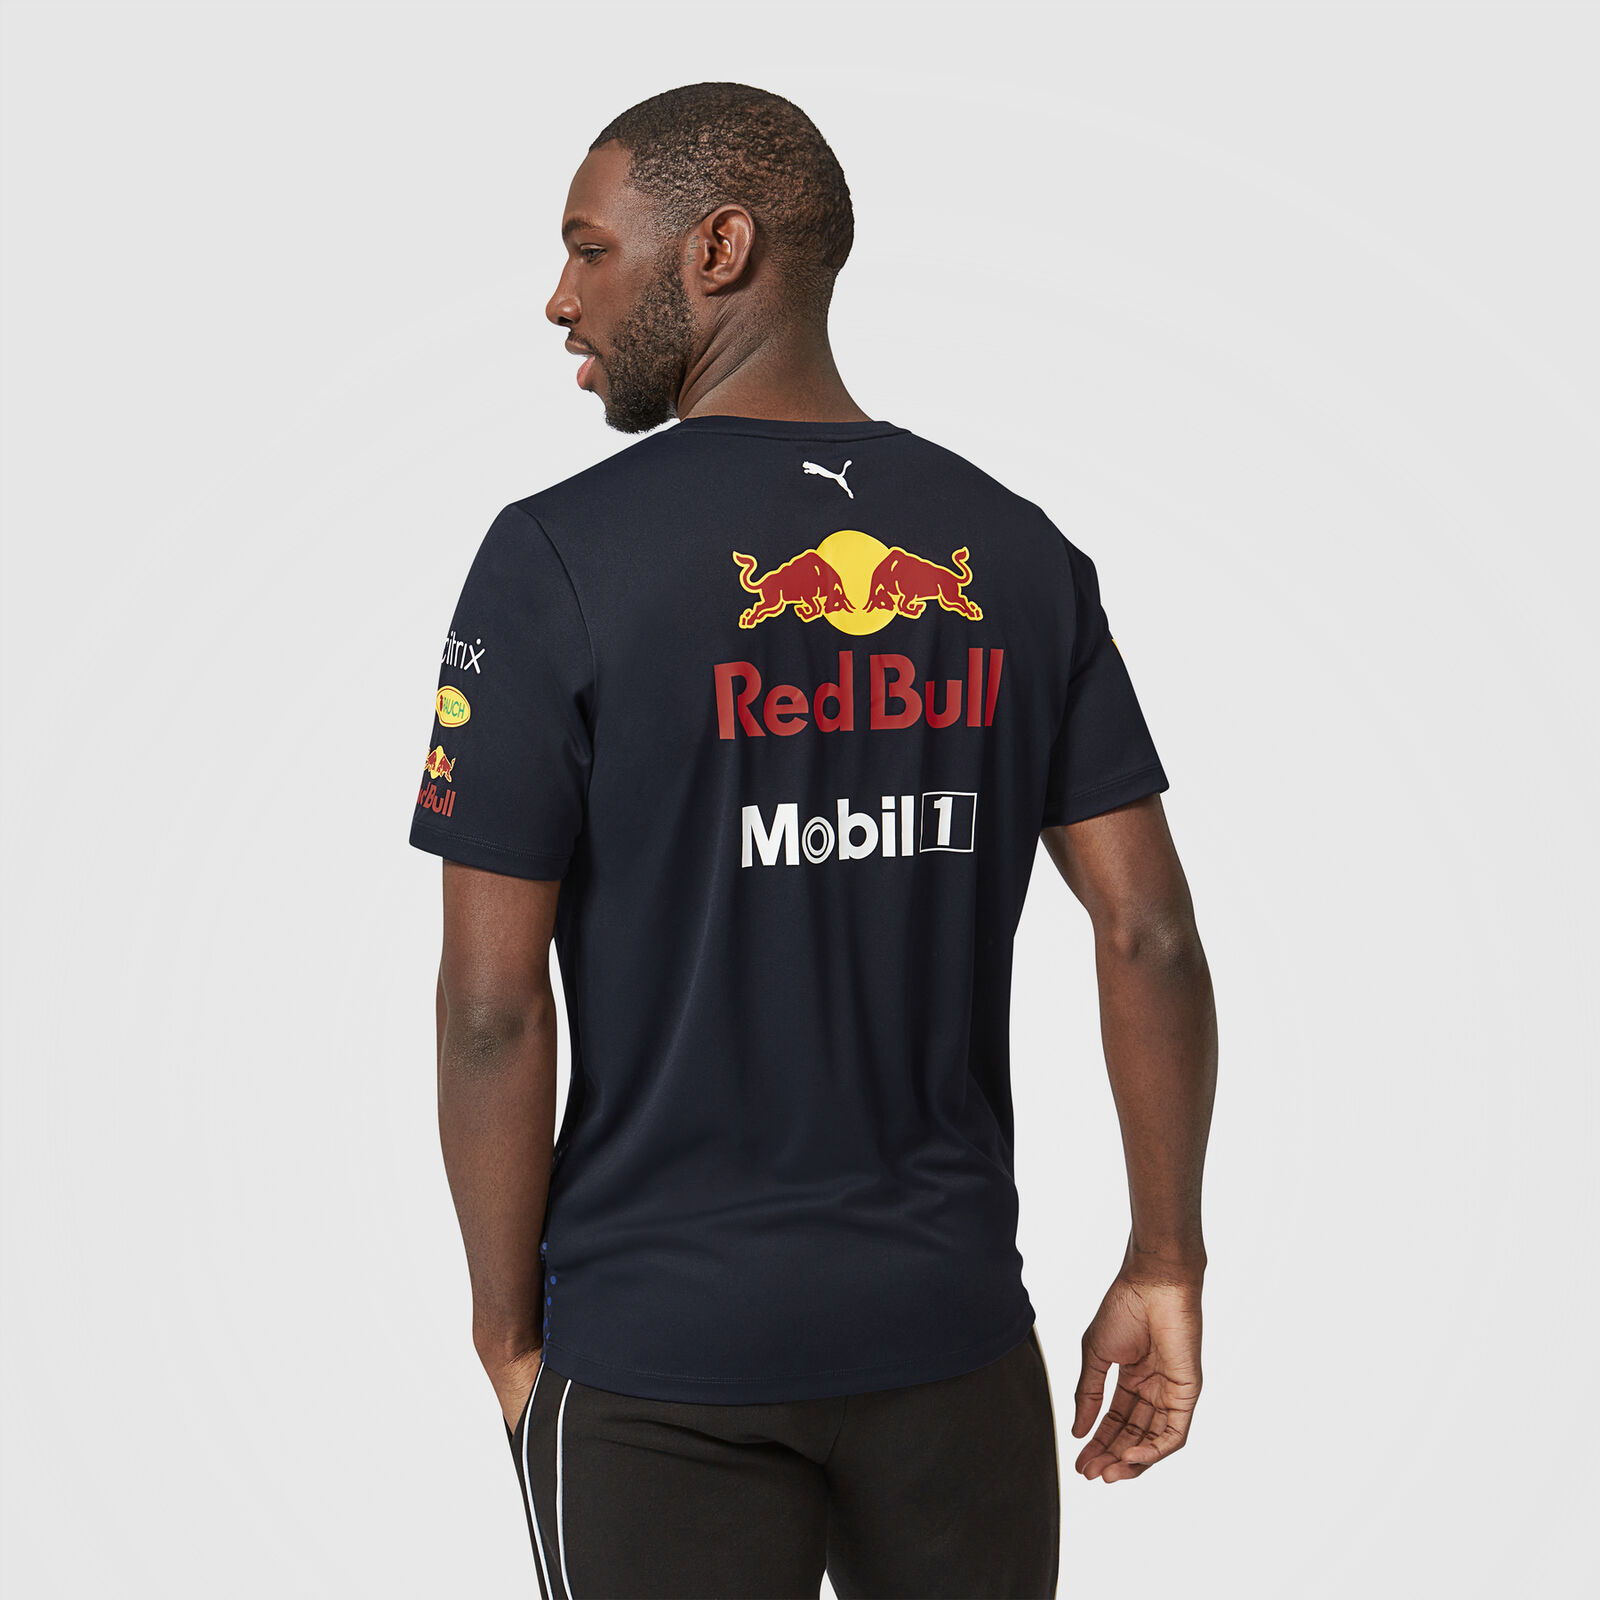 21 Team T Shirt Red Bull Racing Fuel For Fans